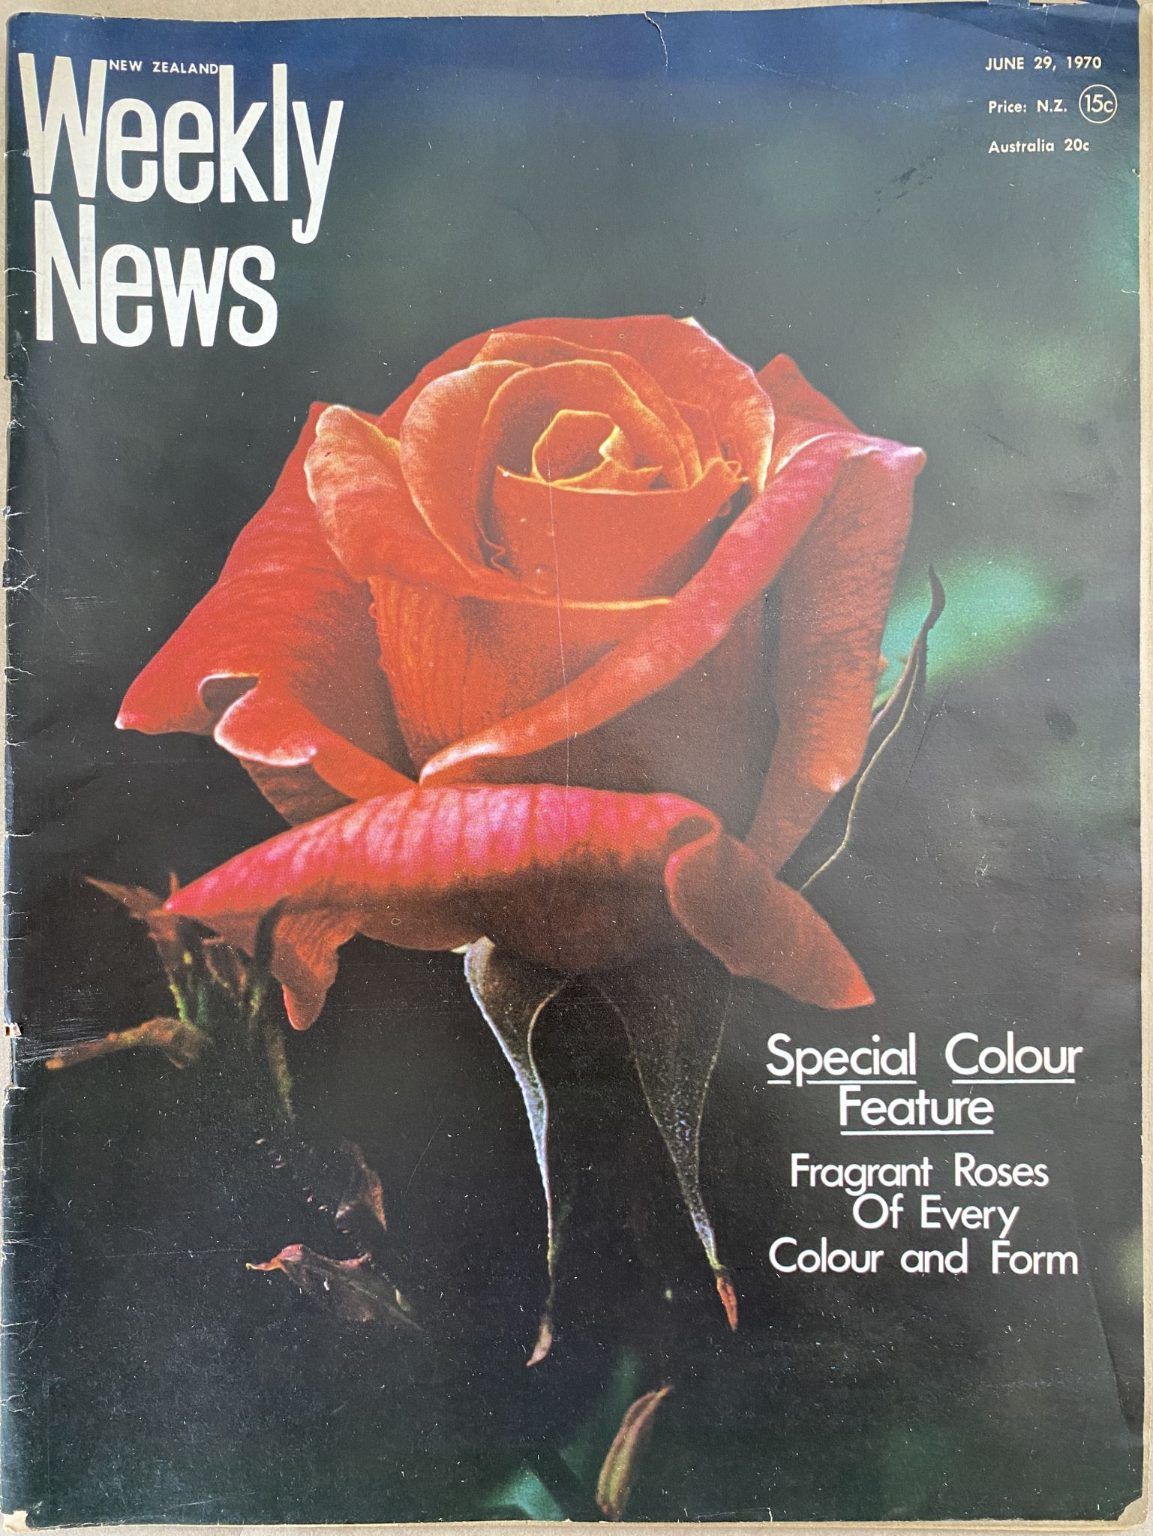 OLD NEWSPAPER: New Zealand Weekly News, No. 5560, 29 June 1970